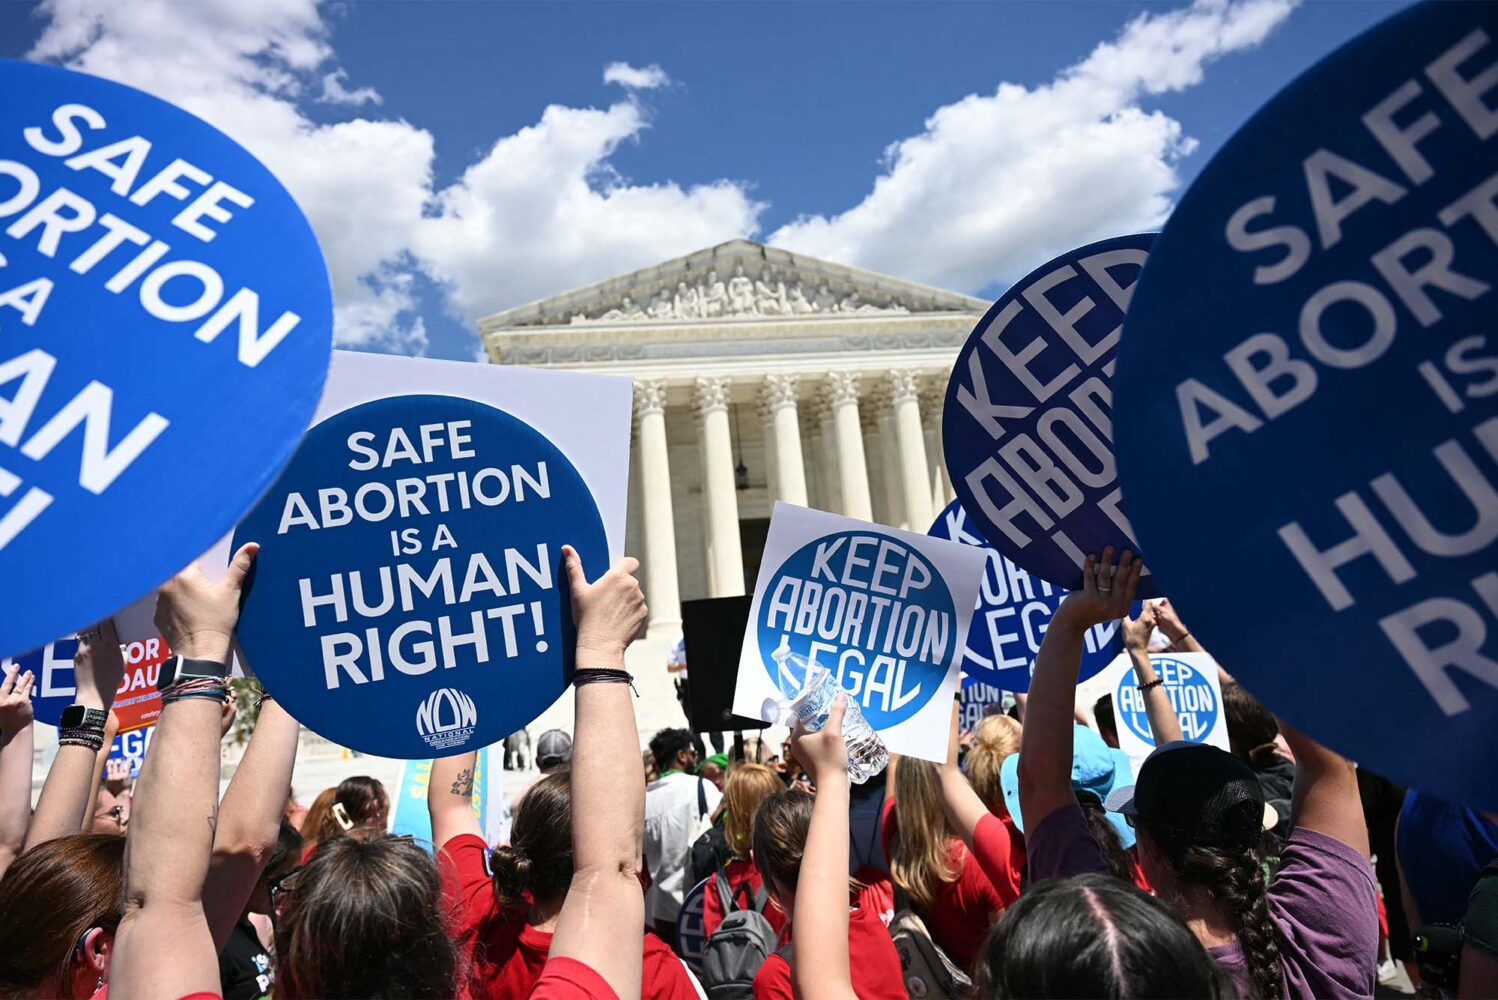 Photo: A sea of protesters holding signs that read "safe abortion is a human right" outside of the US supreme court